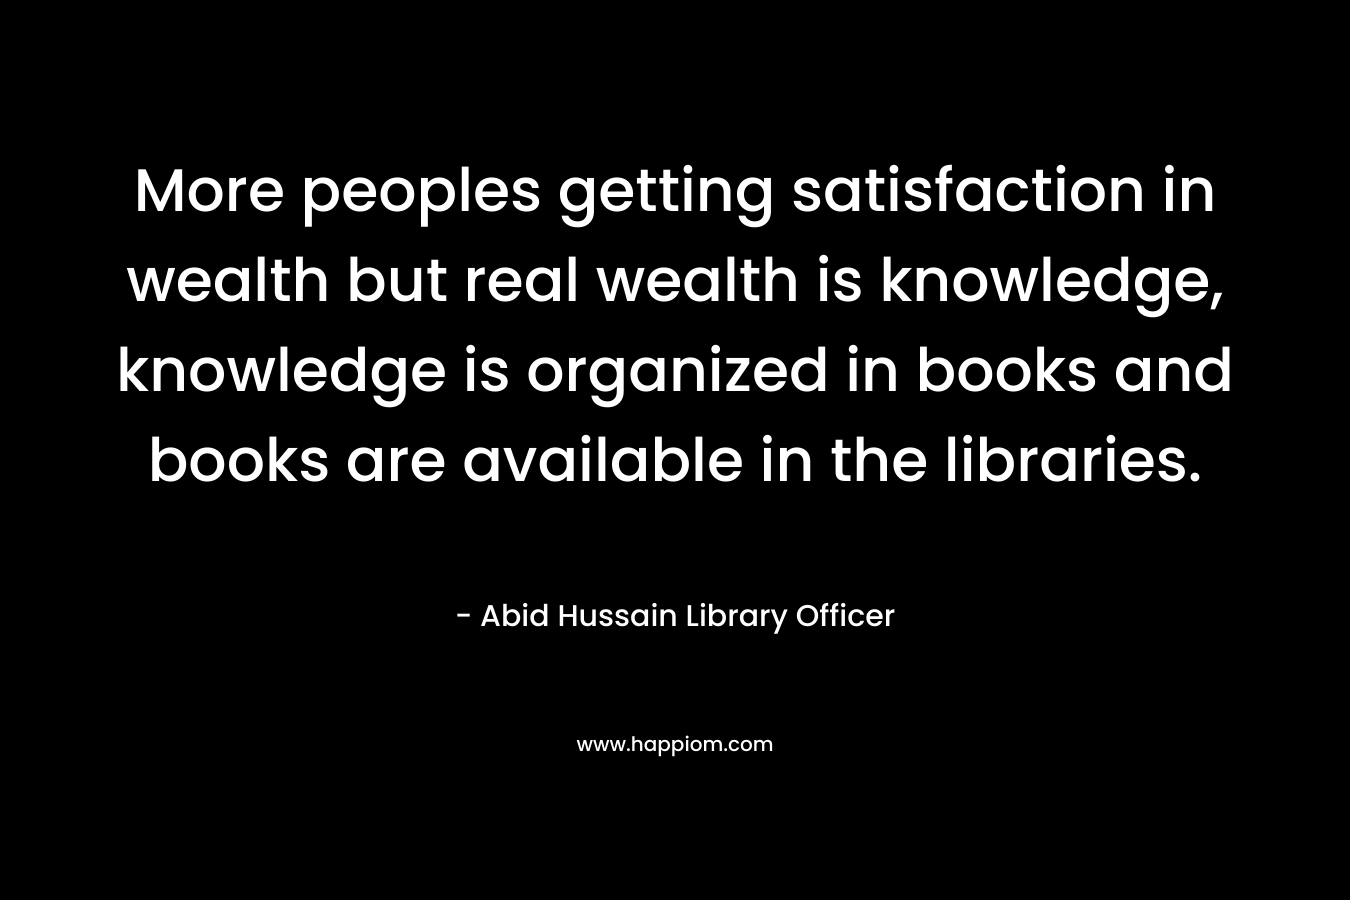 More peoples getting satisfaction in wealth but real wealth is knowledge, knowledge is organized in books and books are available in the libraries.